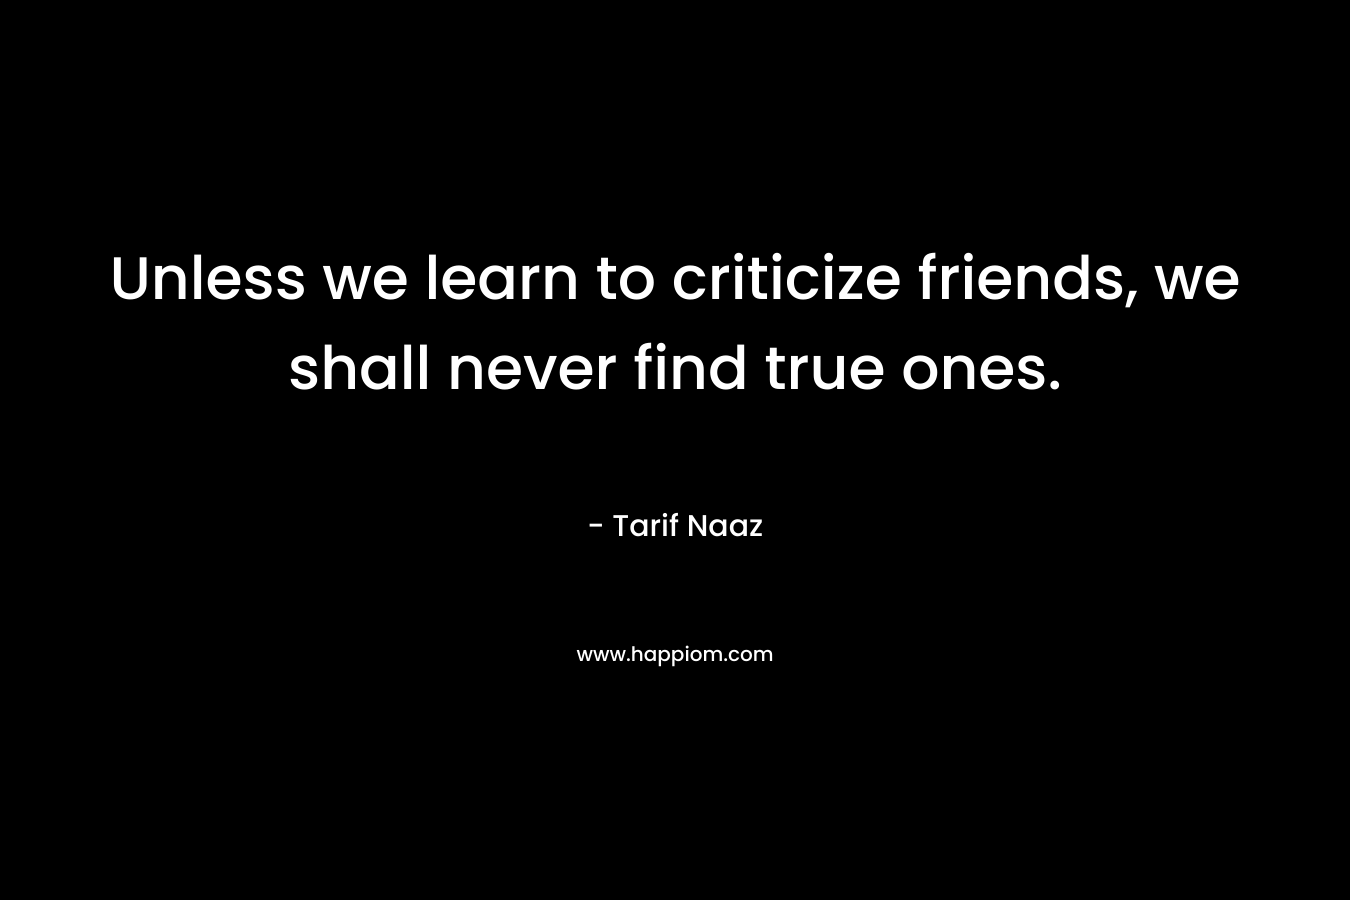 Unless we learn to criticize friends, we shall never find true ones.